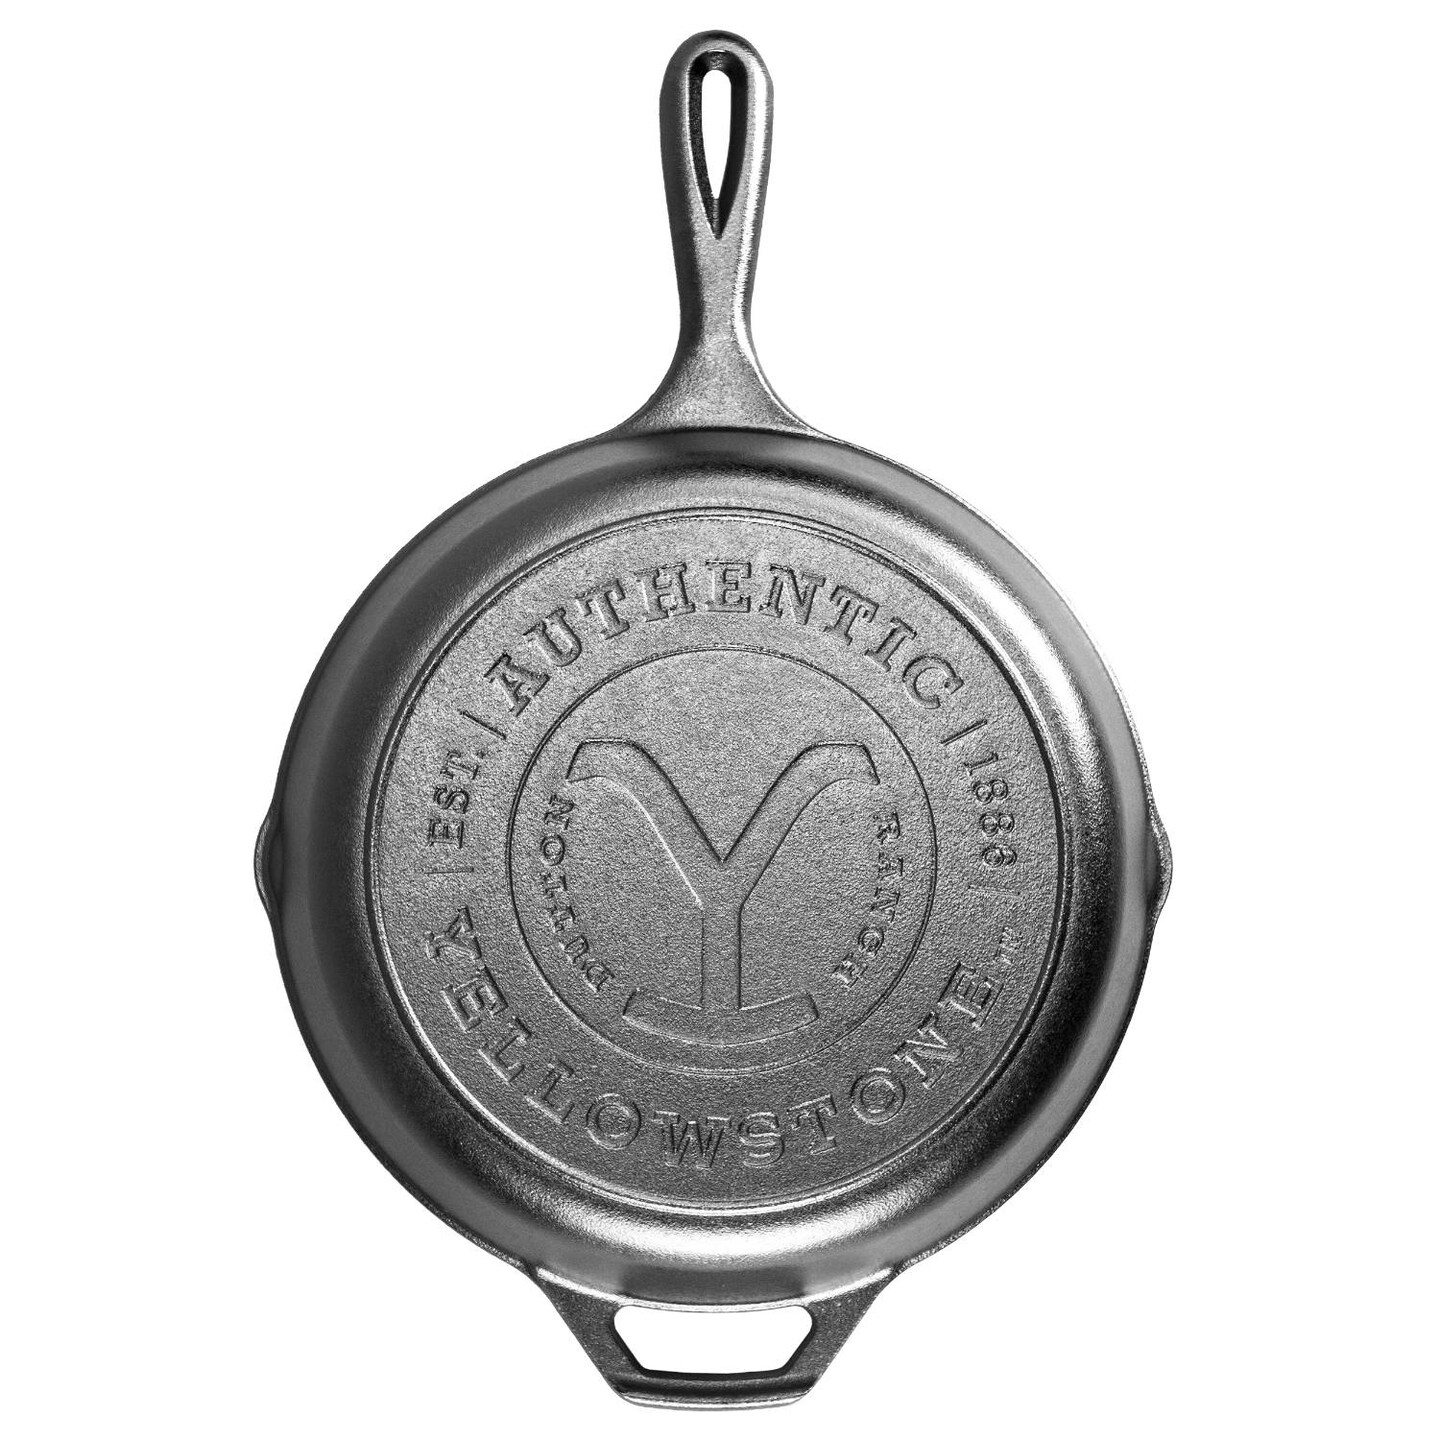 Lodge Yellowstone Cast Iron Skillet, 10.25 inch diameter with